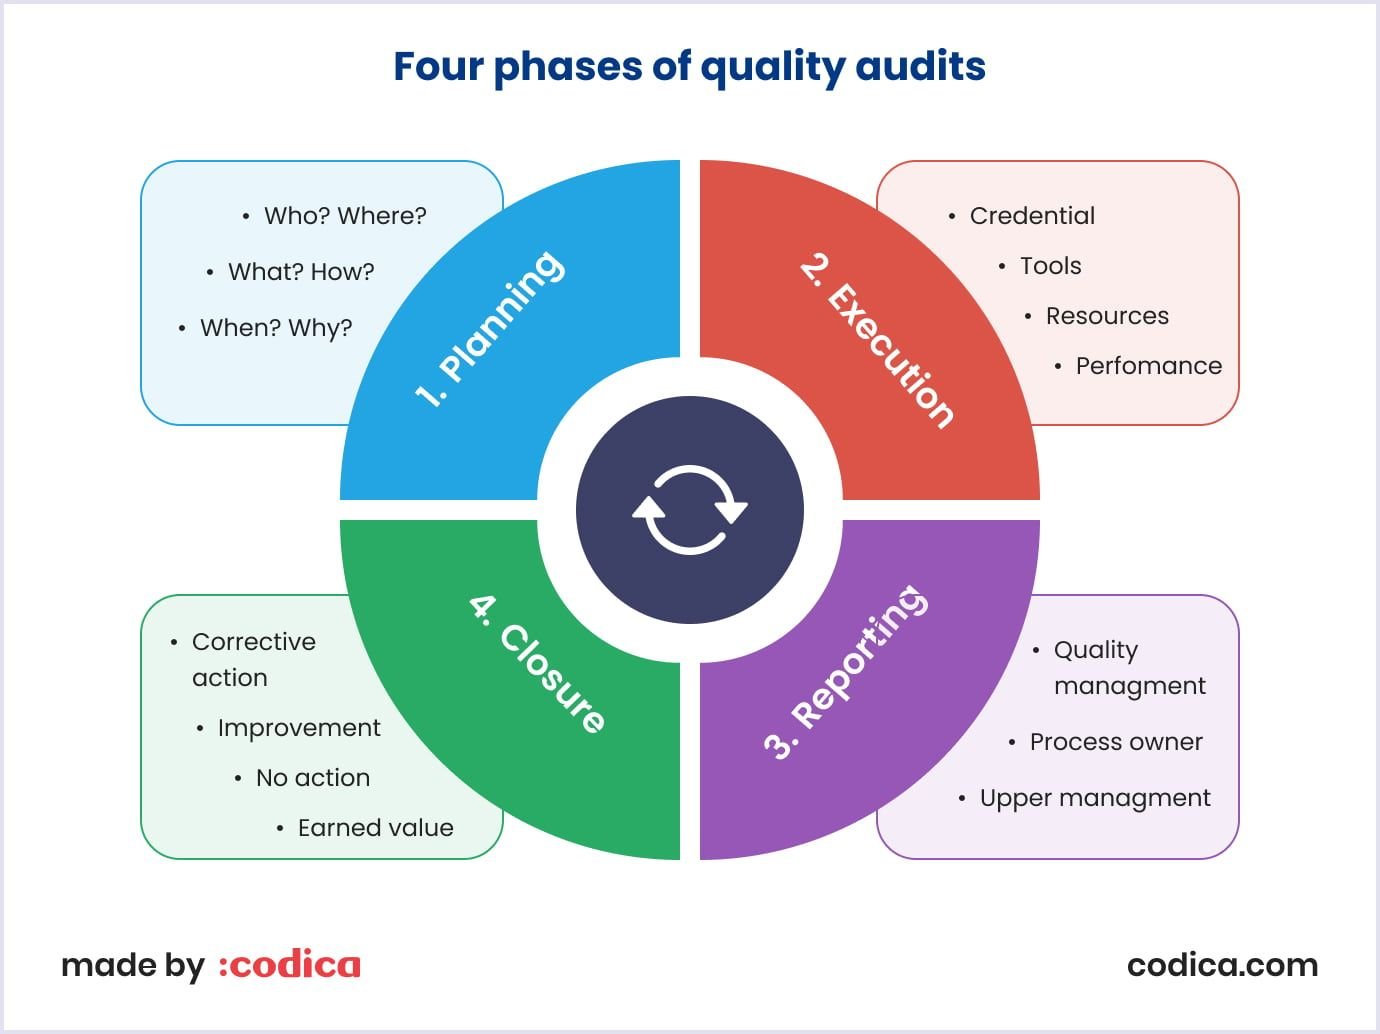 Main phases of quality audits